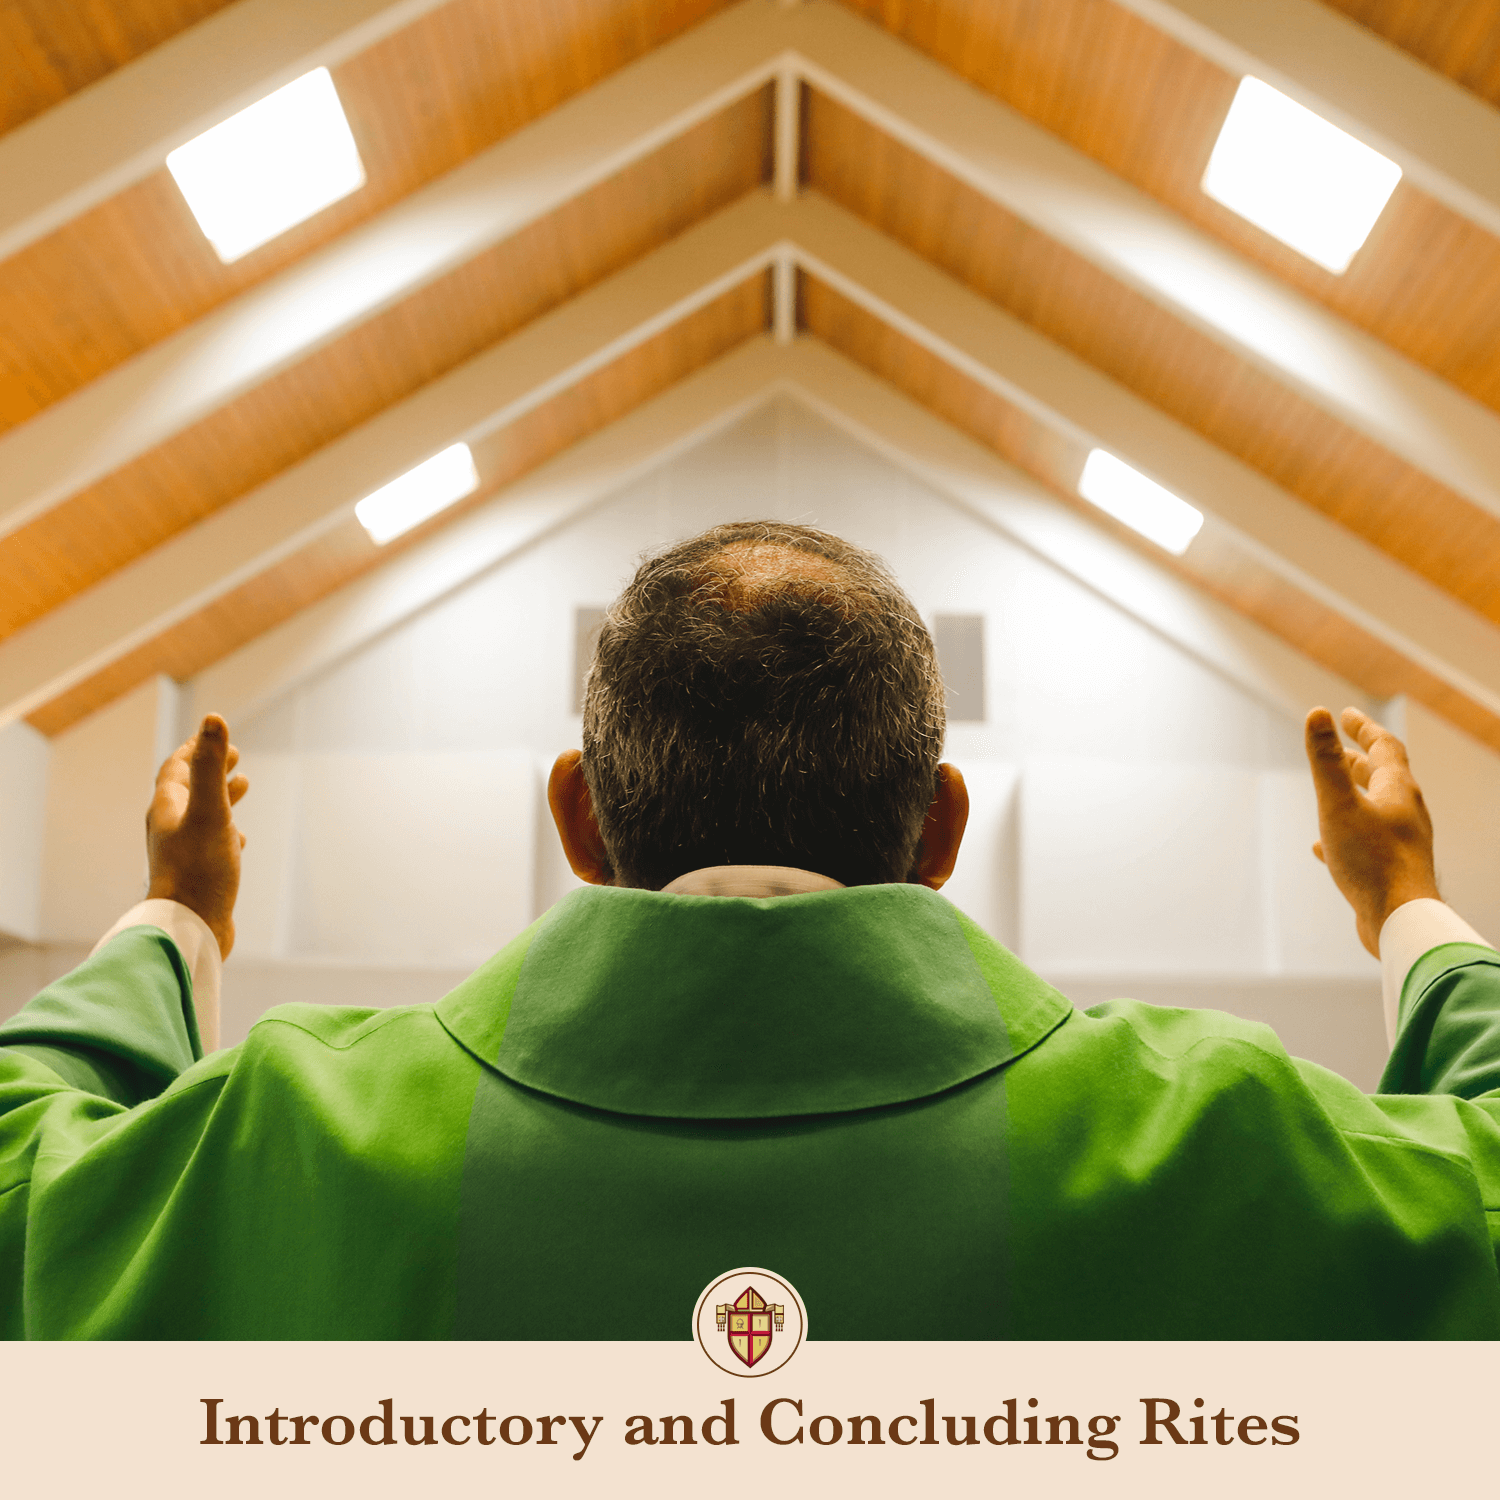 Introductory and Concluding Rites